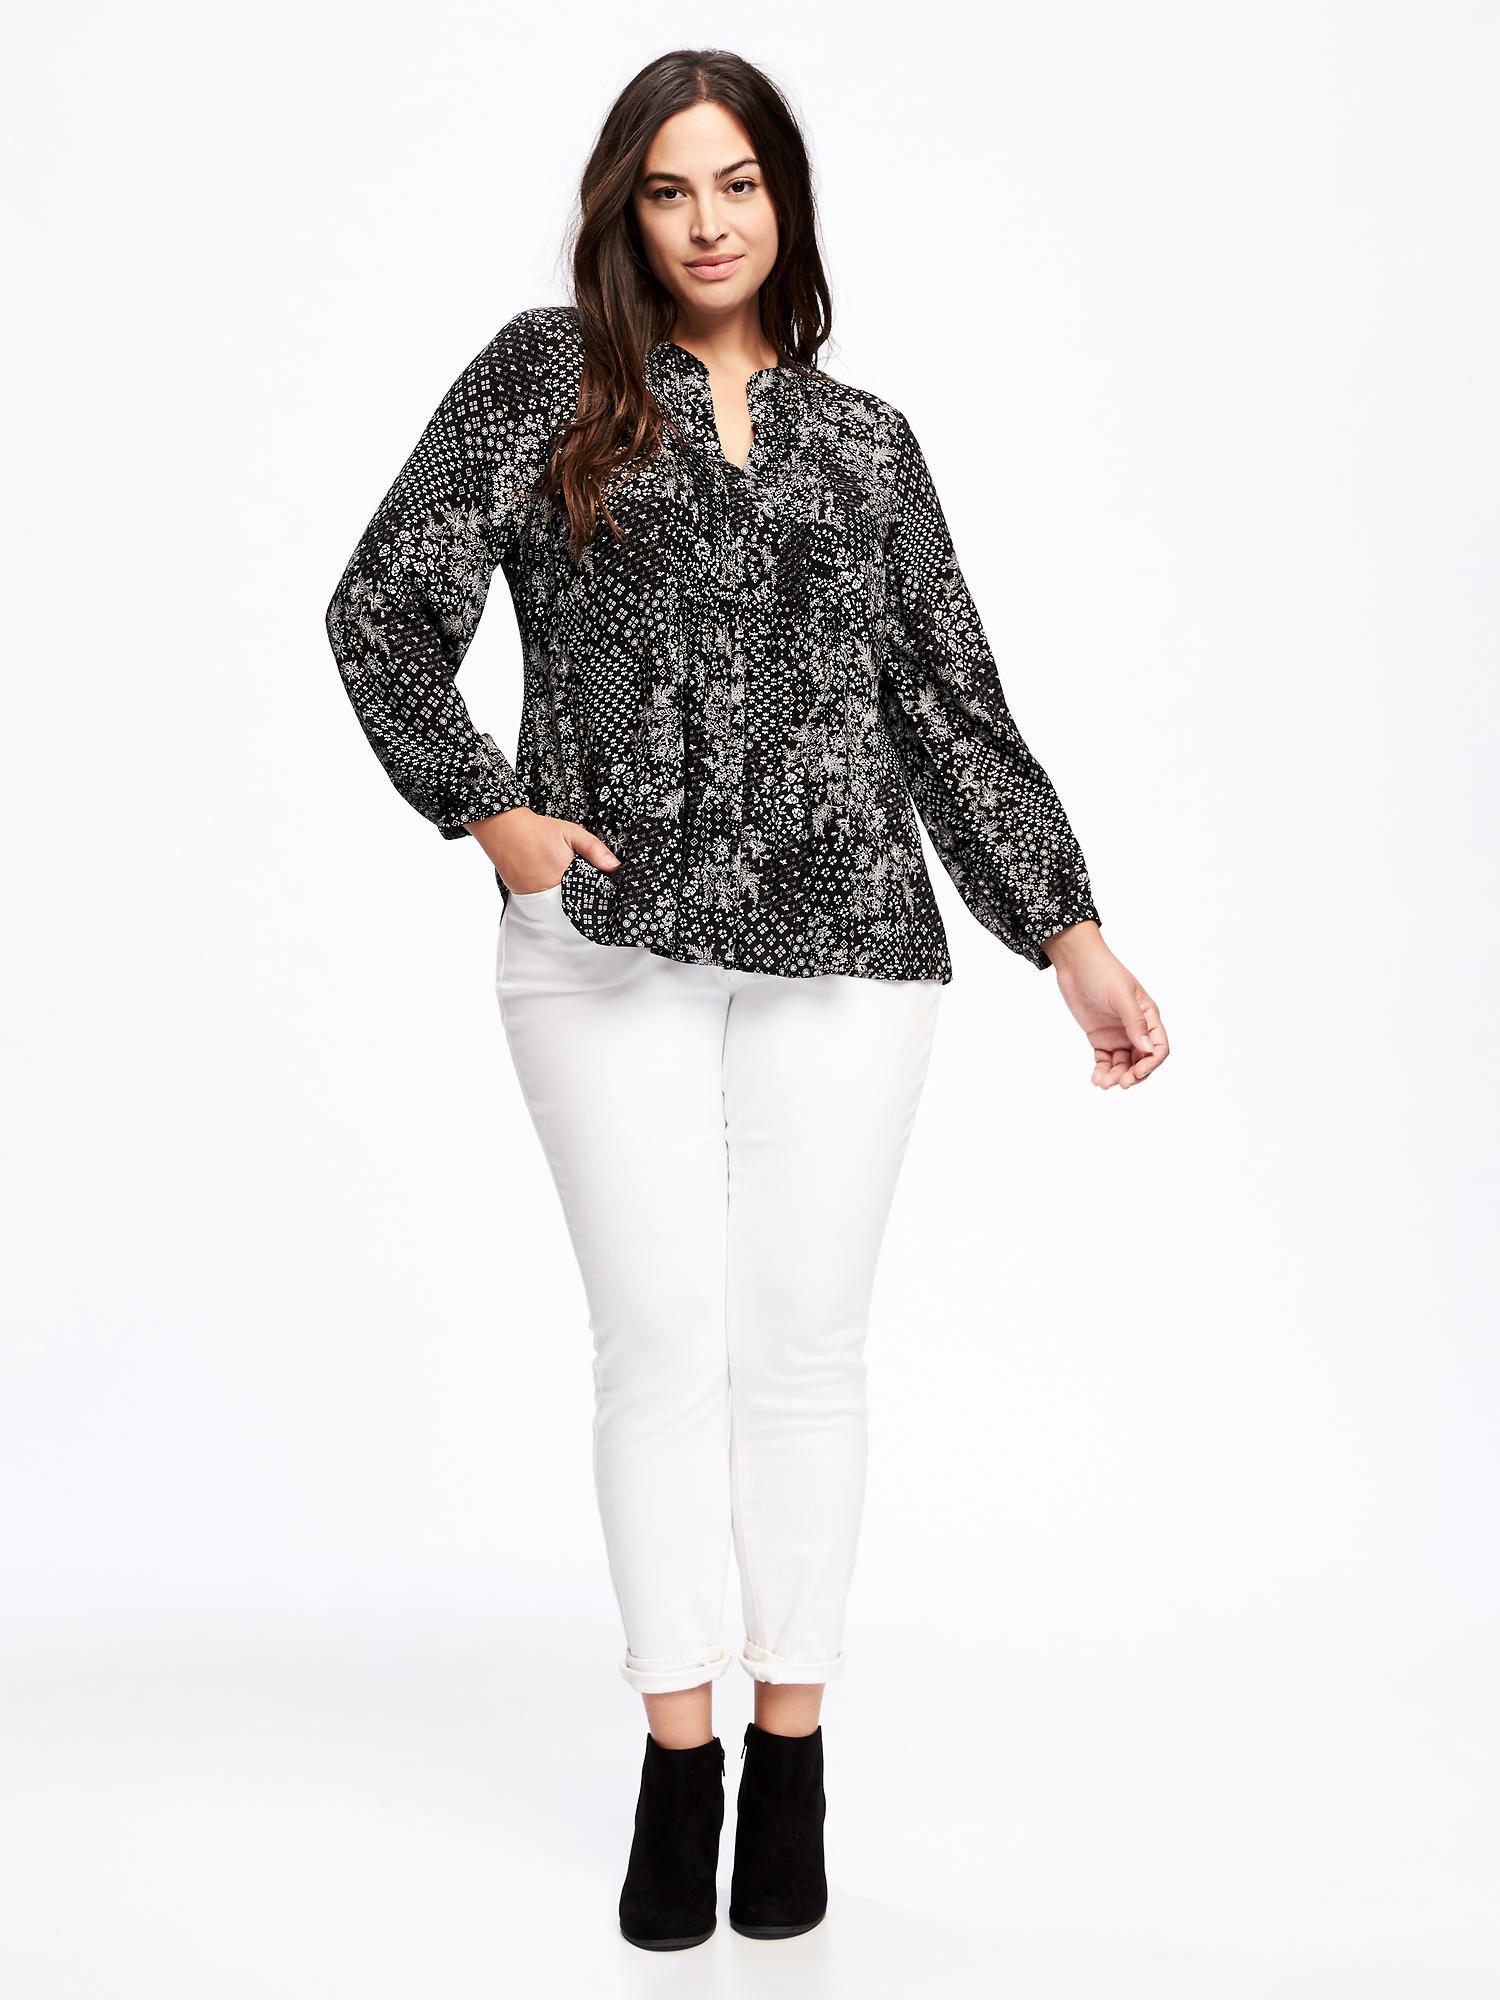 Pintuck Plus-Size Swing Blouse | Old Navy